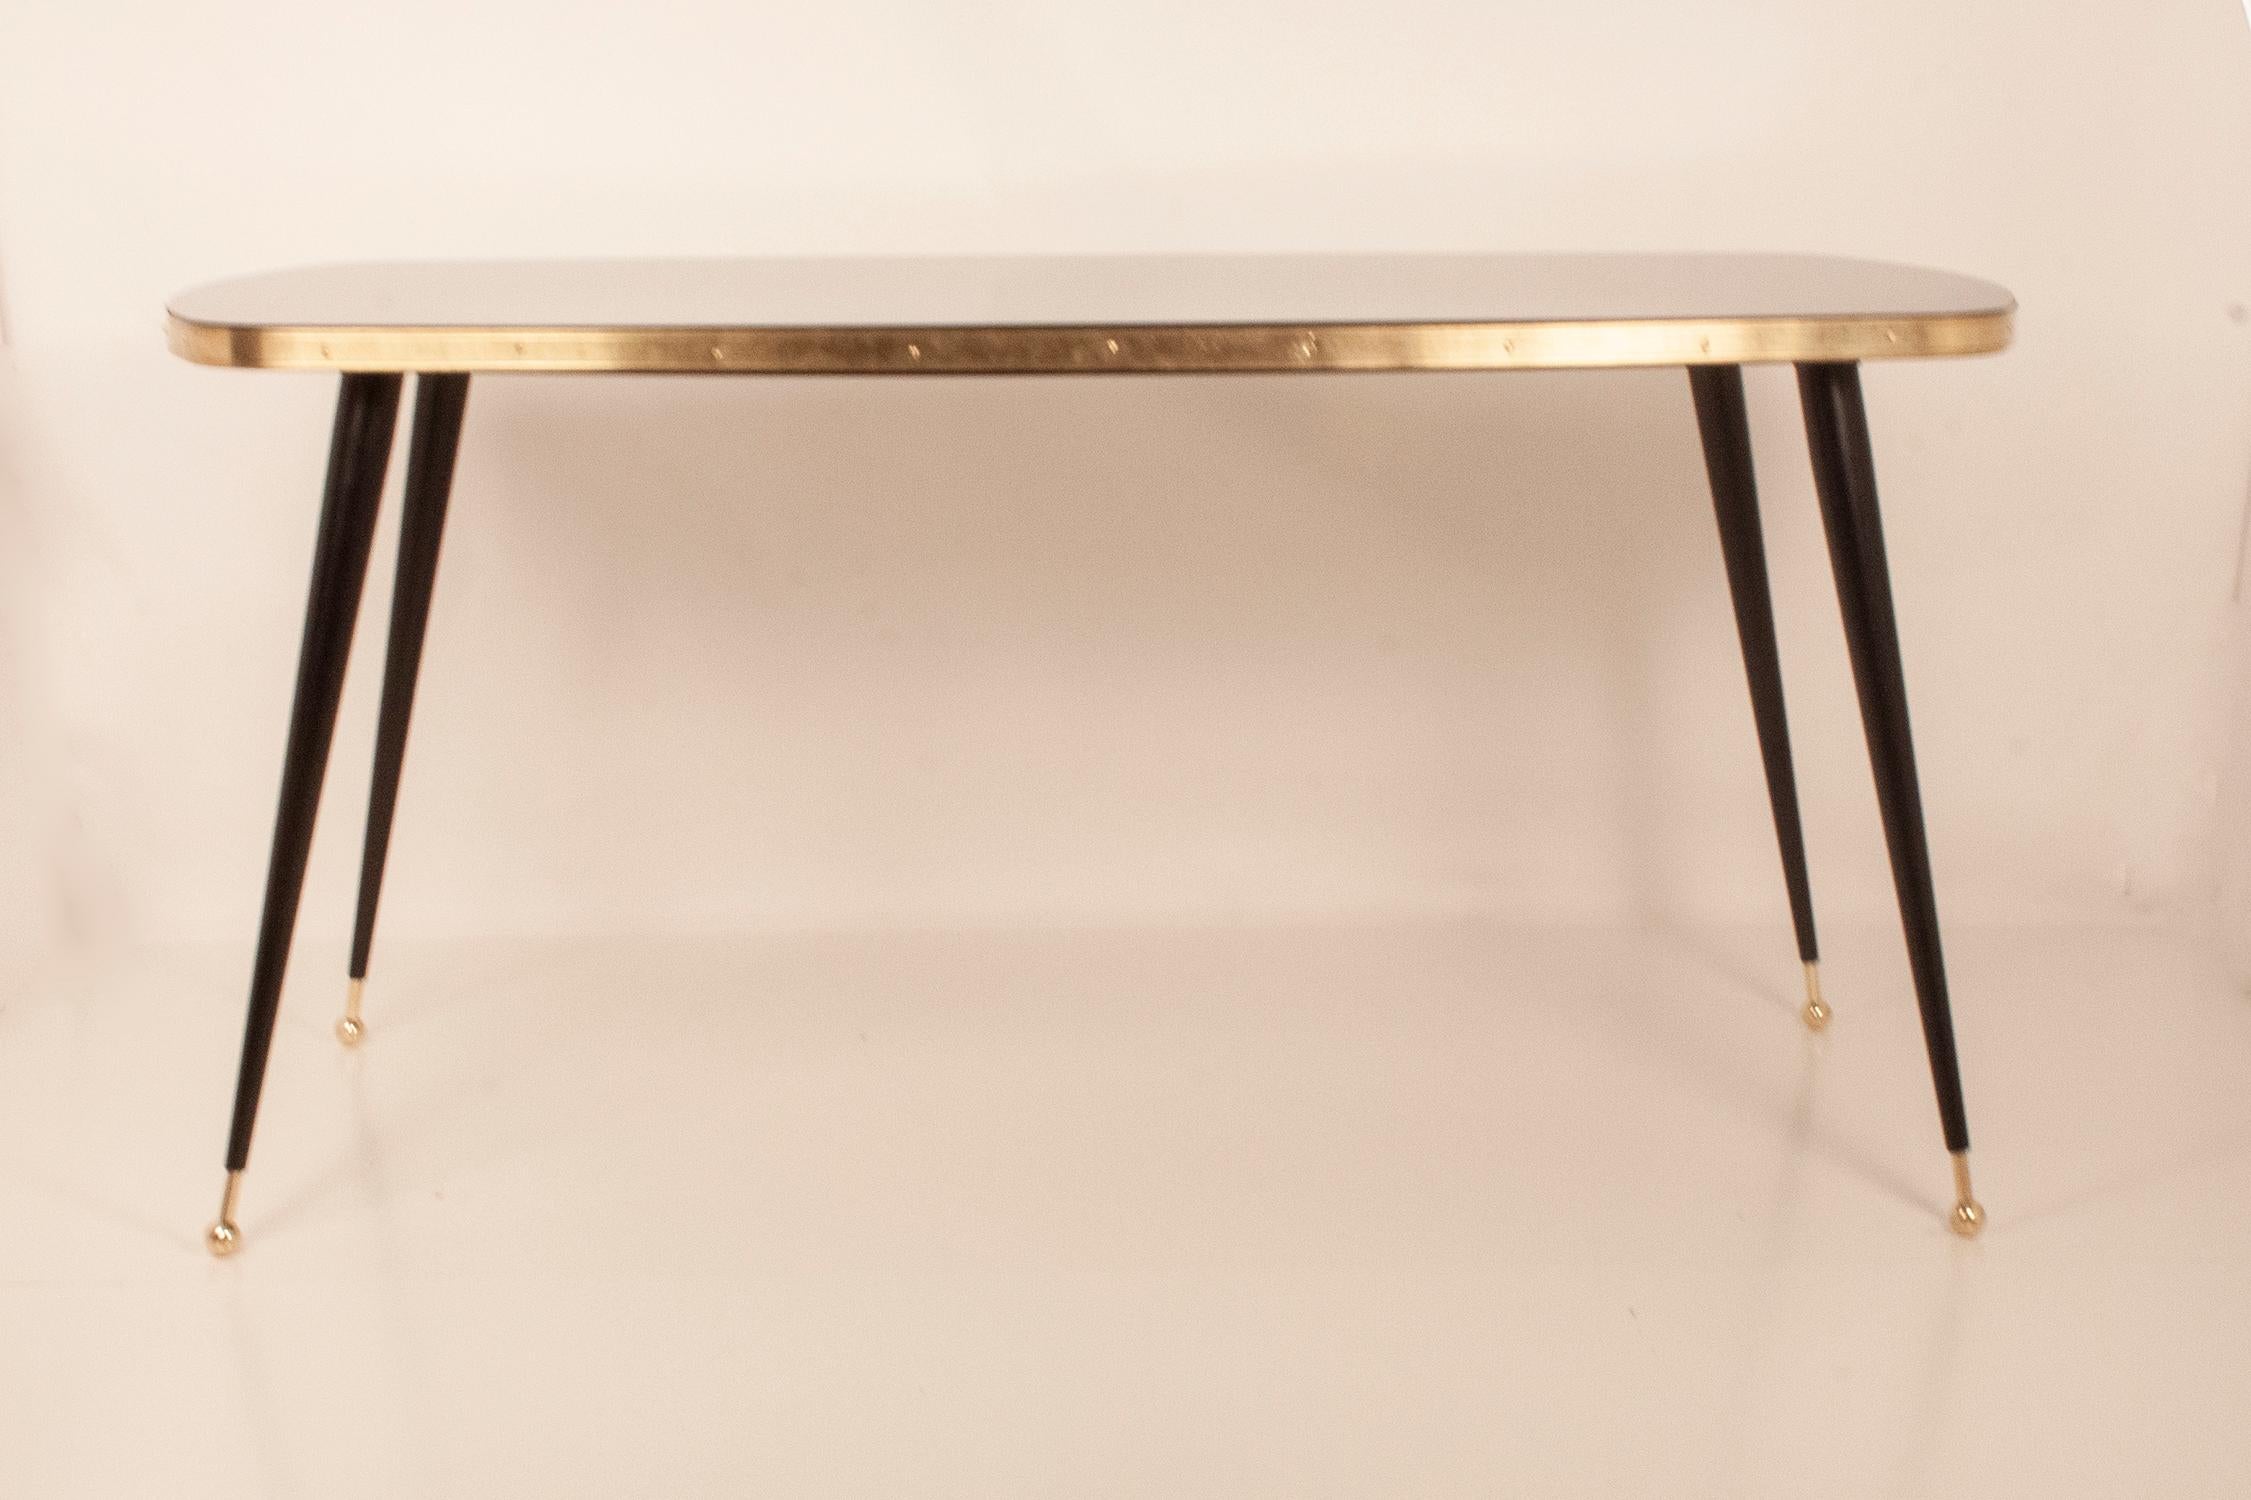 Black glass dining table, brass, black iron legs, Spain. New
Dining table made in DM and with white glass top. The iron legs are lacquered in black. Golden brass leg termination.
It can be done in different; shapes (round, square, oval ....) back